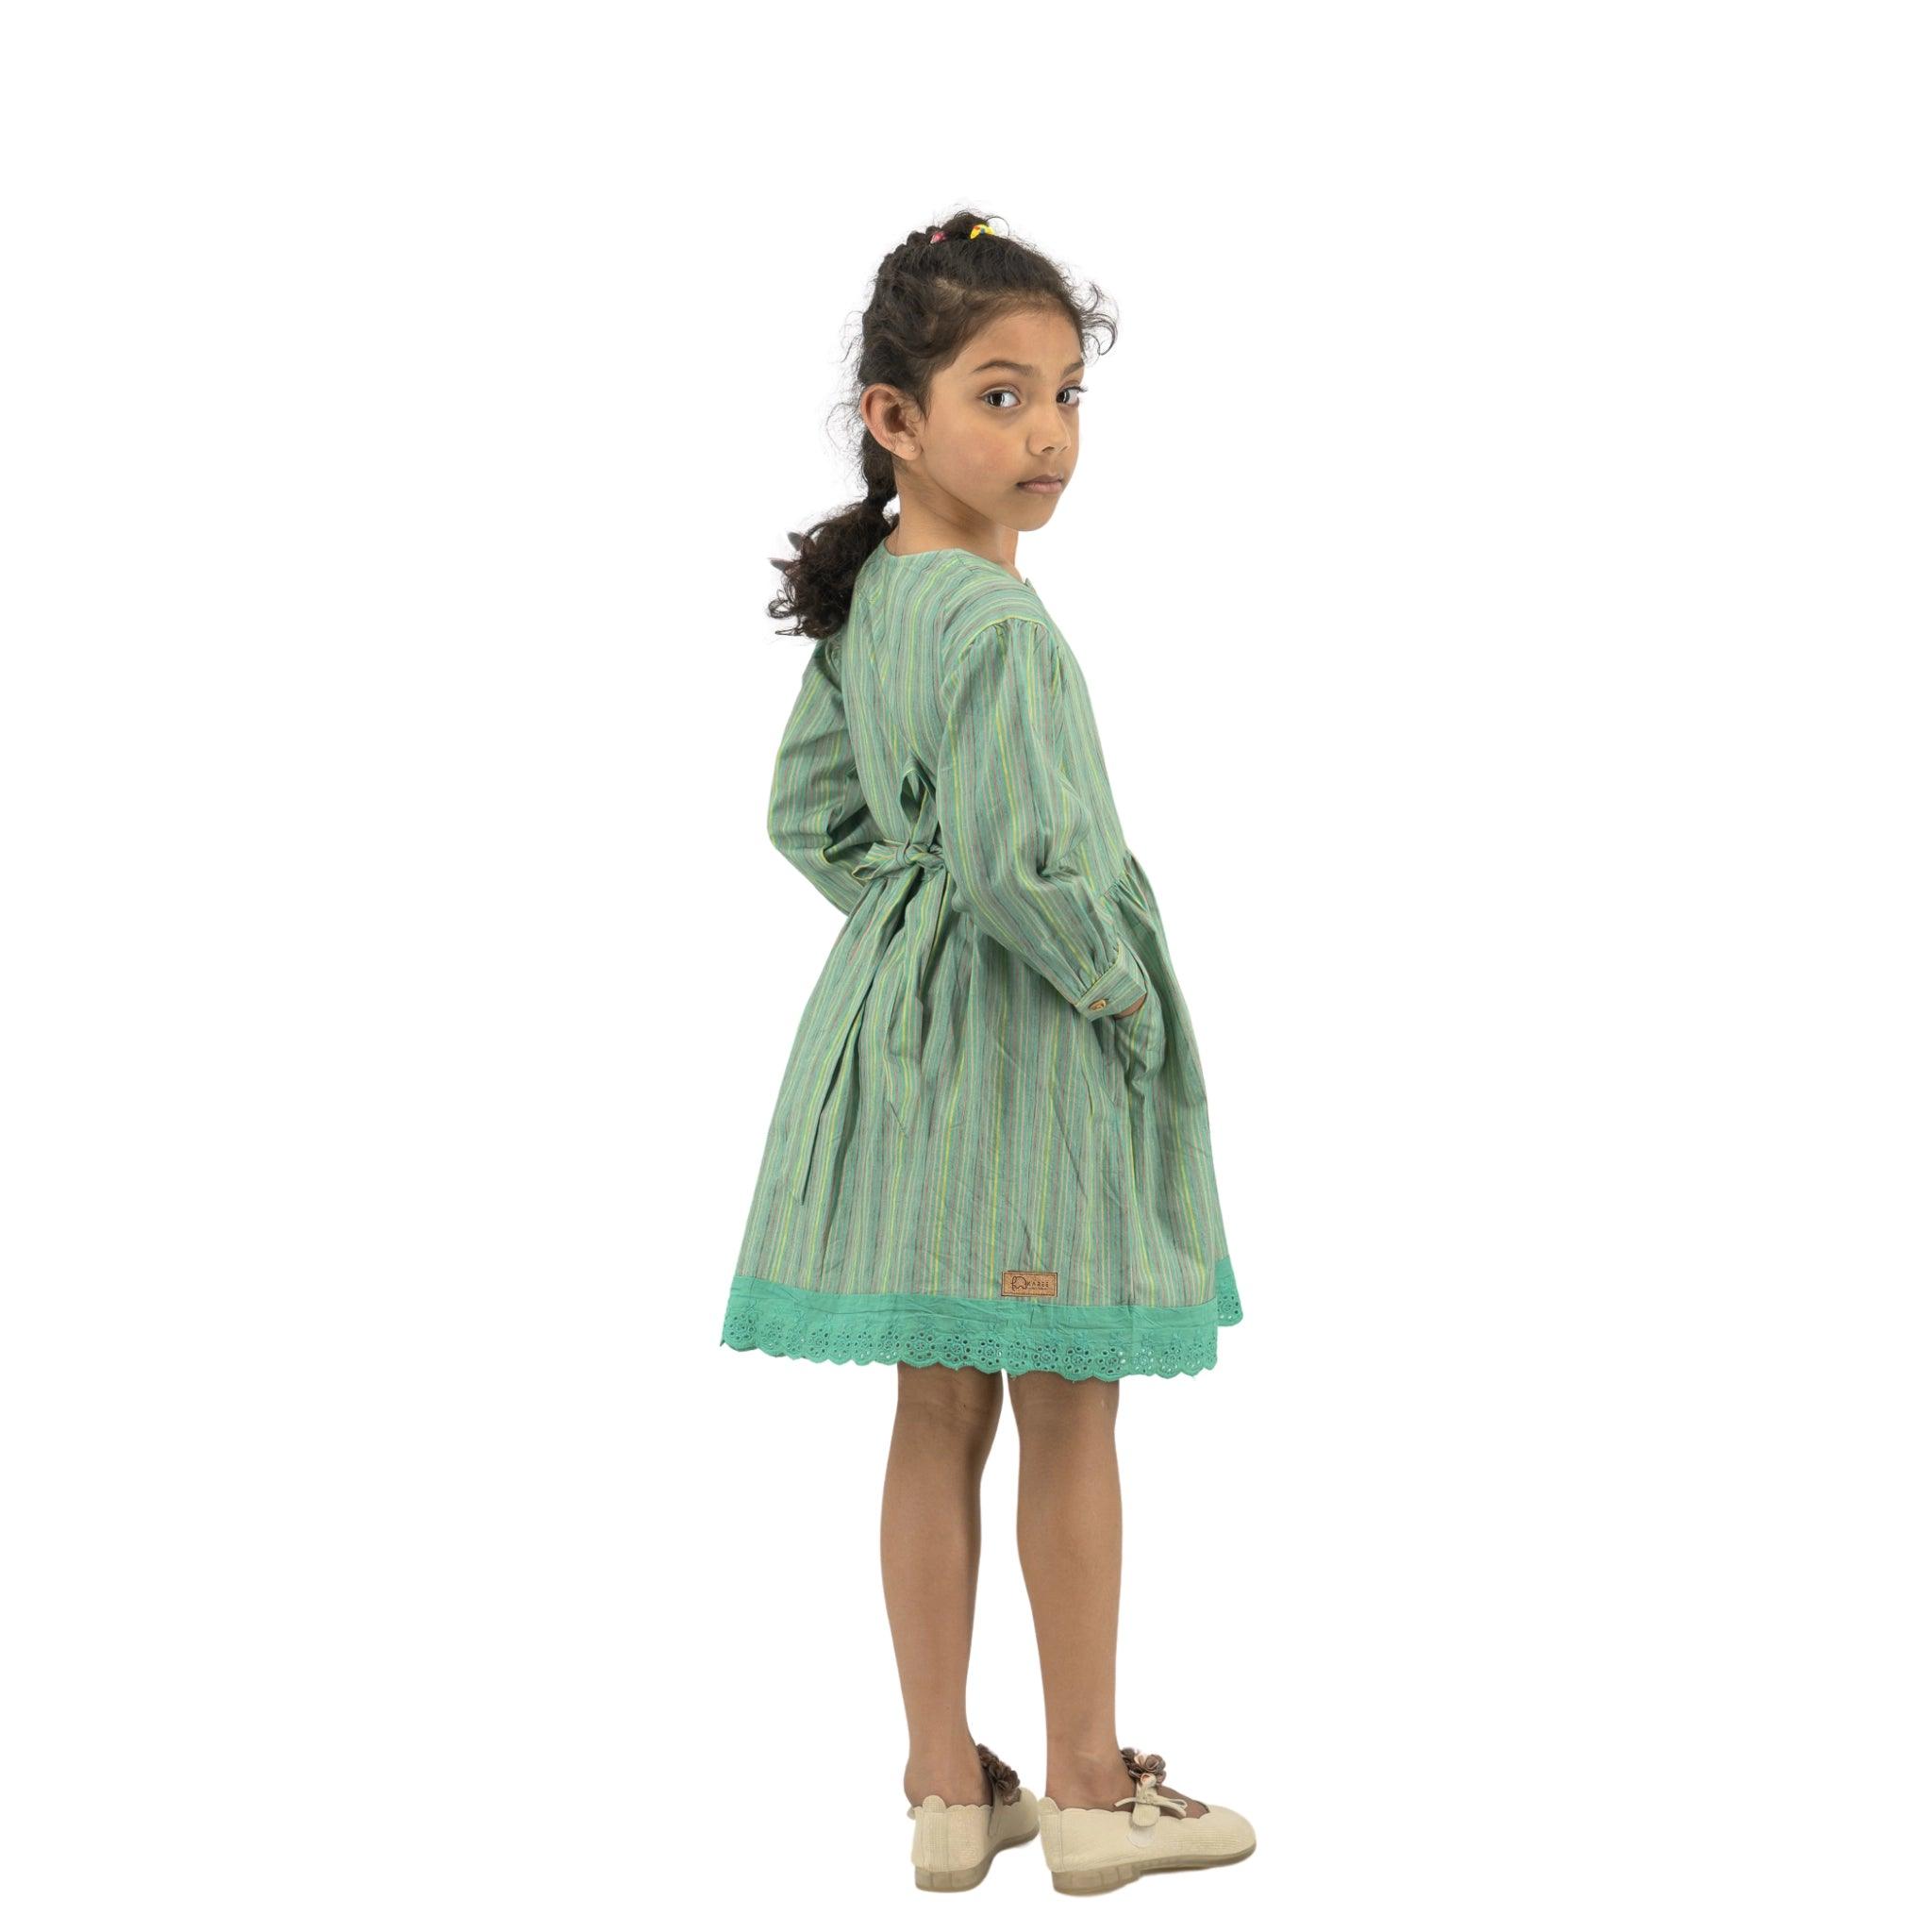 Young girl in a Karee Green Striped Long Puff Sleeve Cotton Dress and white shoes, standing sideways, looking over her shoulder with a curious expression.